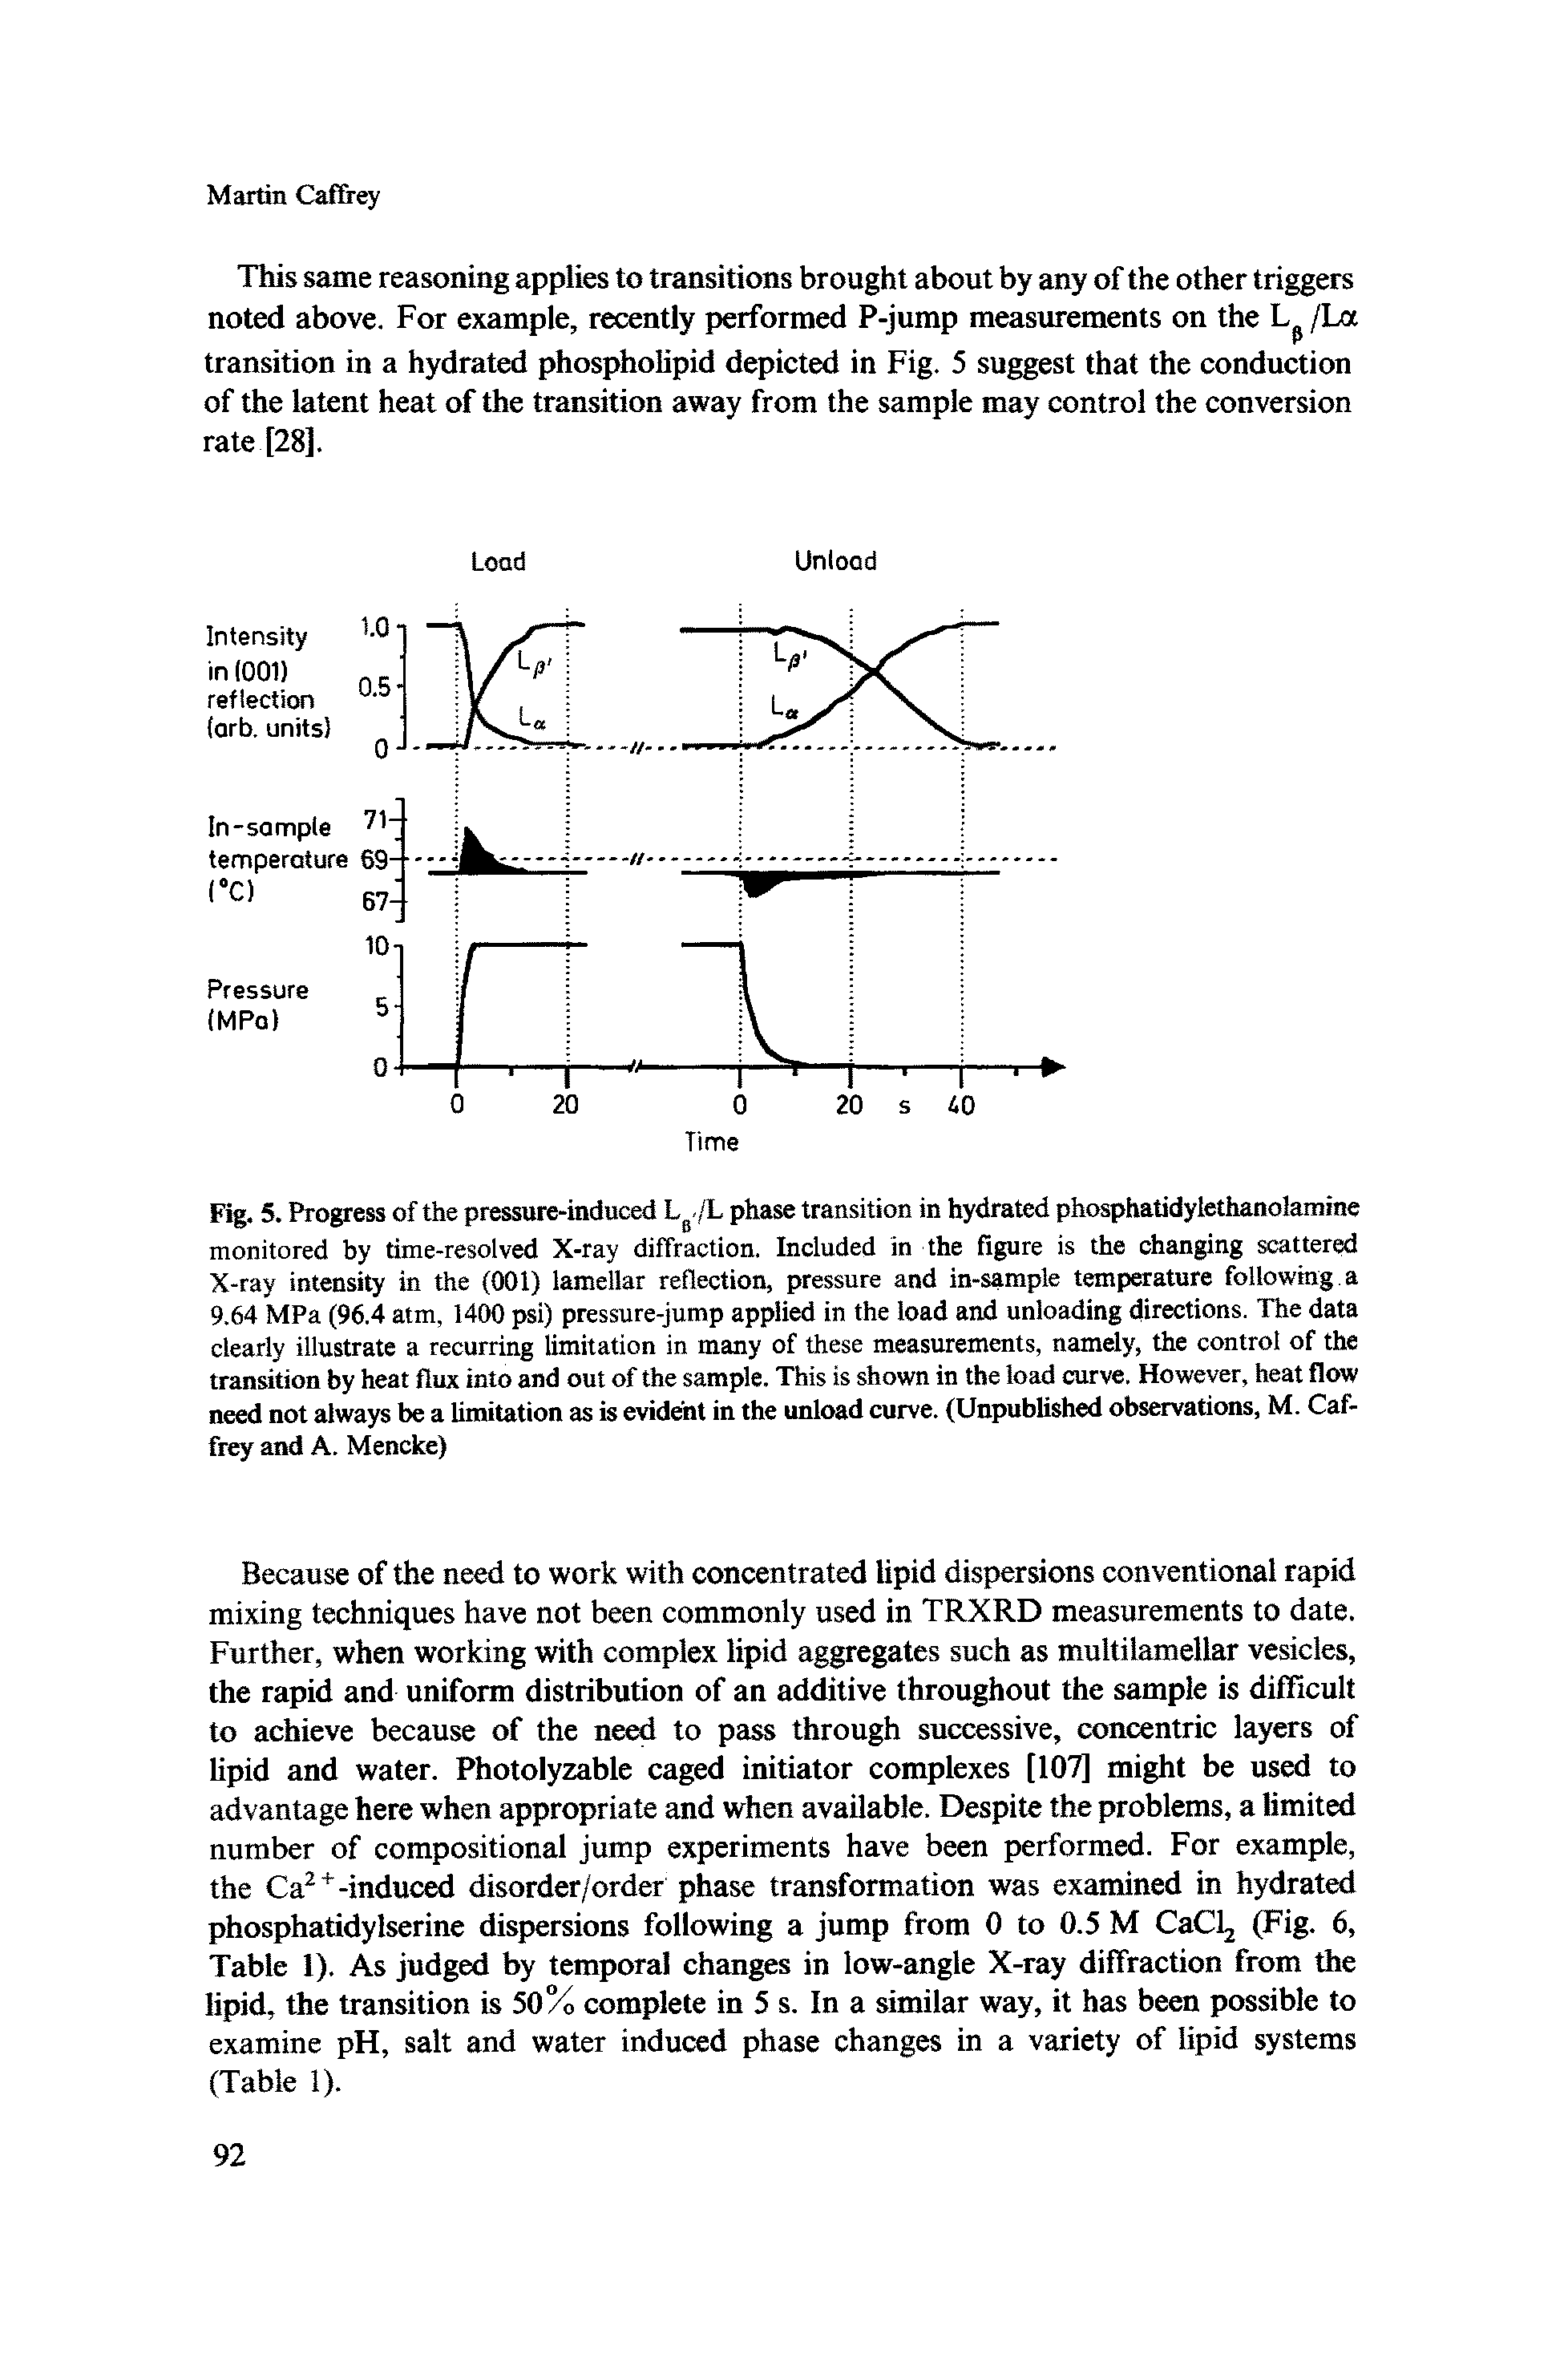 Fig. 5. Progress of the pressure-induced L. /L phase transition in hydrated phosphatidyiethanolamine monitored by time-resolved X-ray diffraction. Included in the figure is the changing scattered X-ray intensity in the (001) lamellar reflection, pressure and in-sample temperature following a 9.64 MPa (96.4 atm, 1400 psi) pressure-jump applied in the load and unloading directions. The data clearly illustrate a recurring limitation in many of these measurements, namely, the control of the transition by heat flux into and out of the sample. This is shown in the load curve. However, heat flow need not always be a limitation as is evident in the unload curve. (Unpublished observations, M. Caf-frey and A. Mencke)...